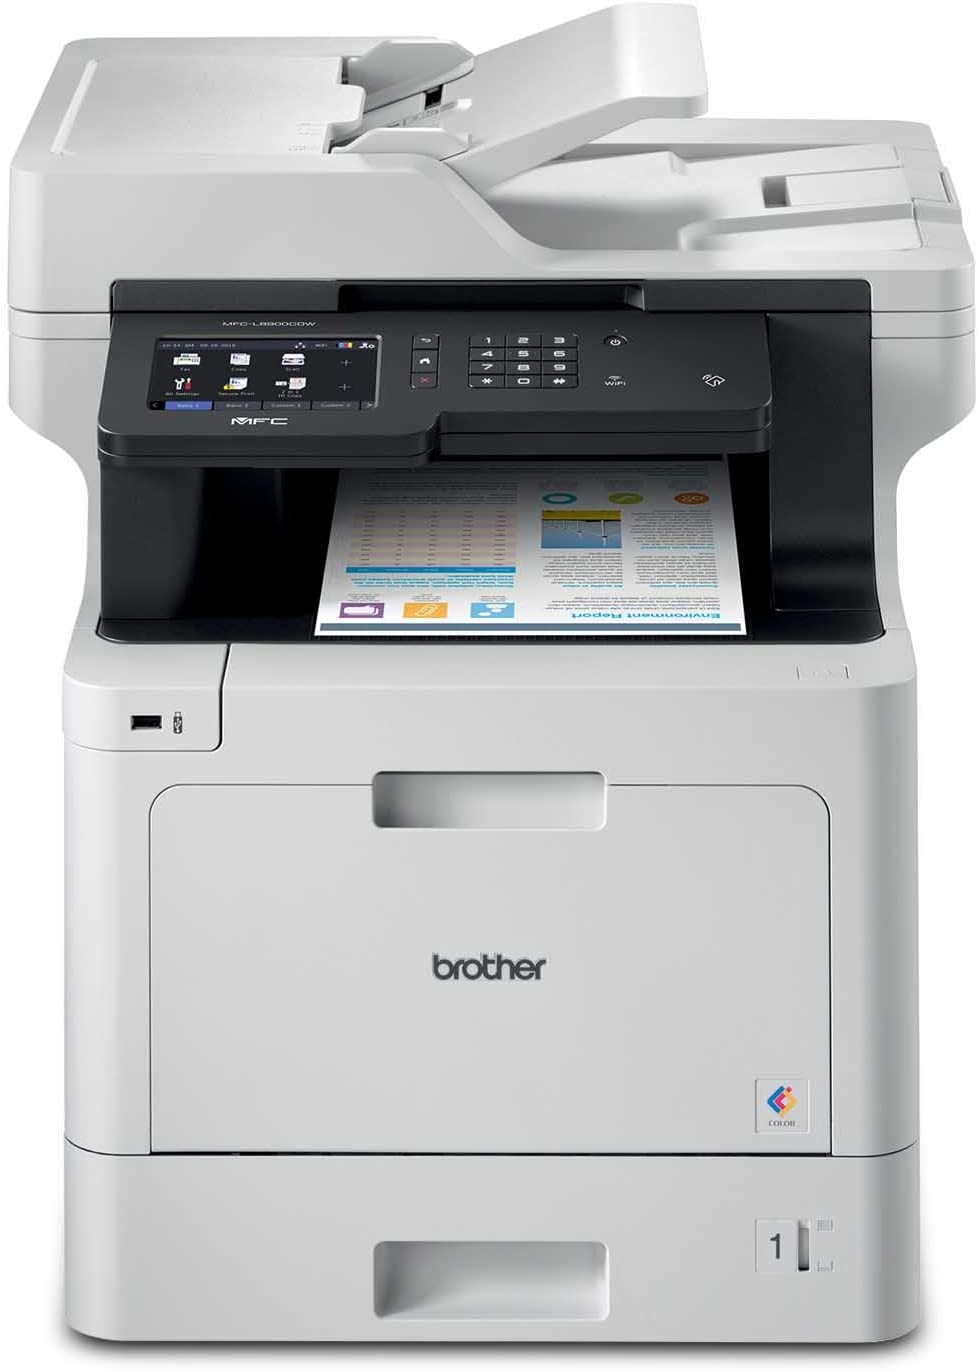 The top office printers on the market